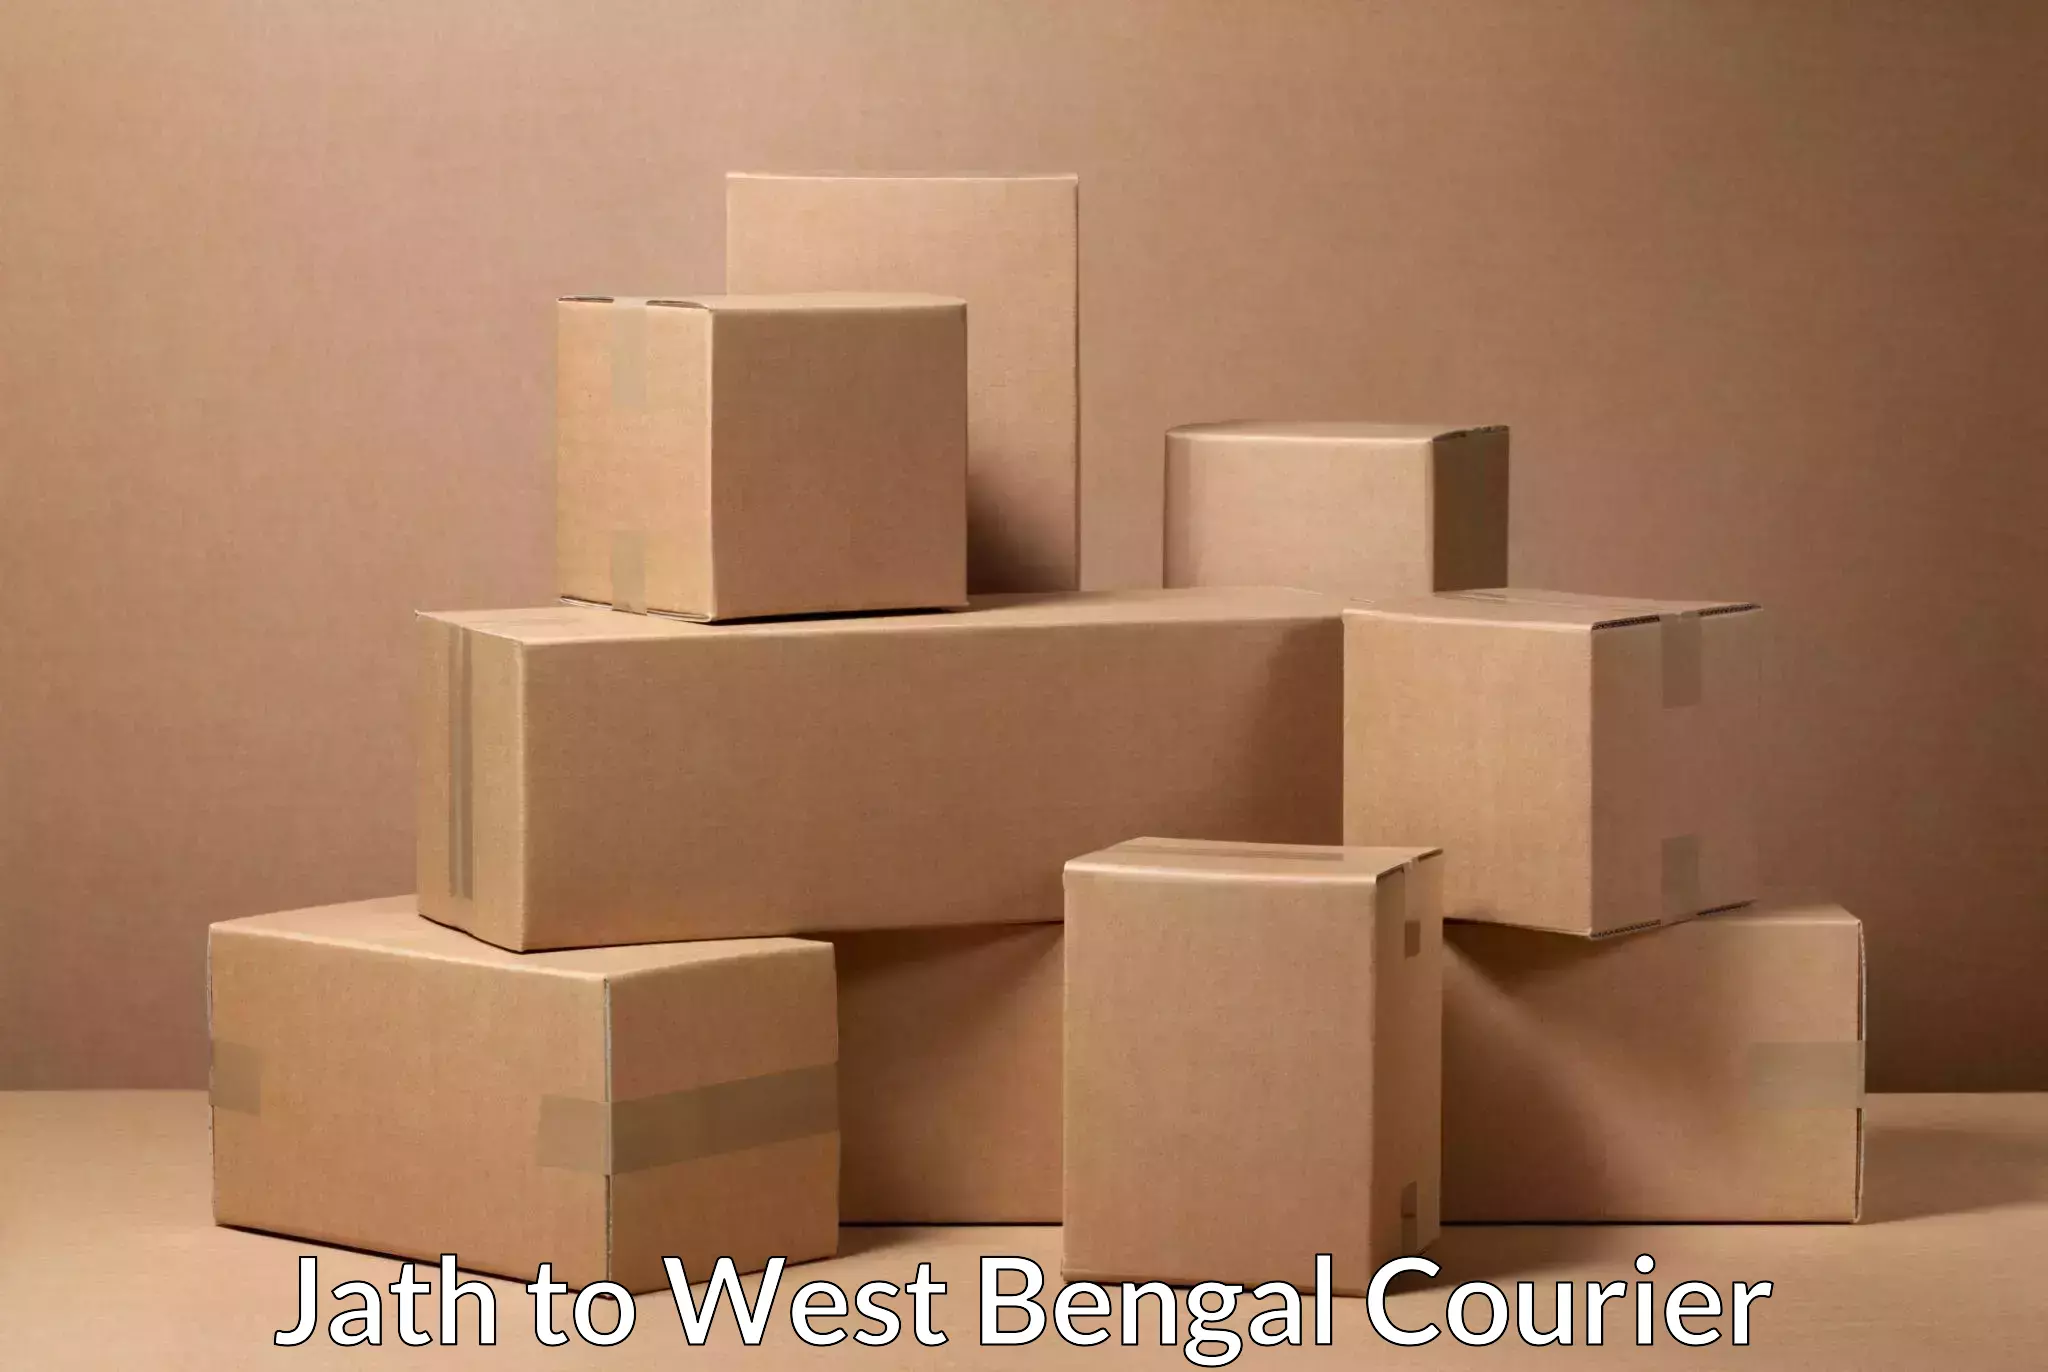 Round-the-clock parcel delivery in Jath to West Bengal